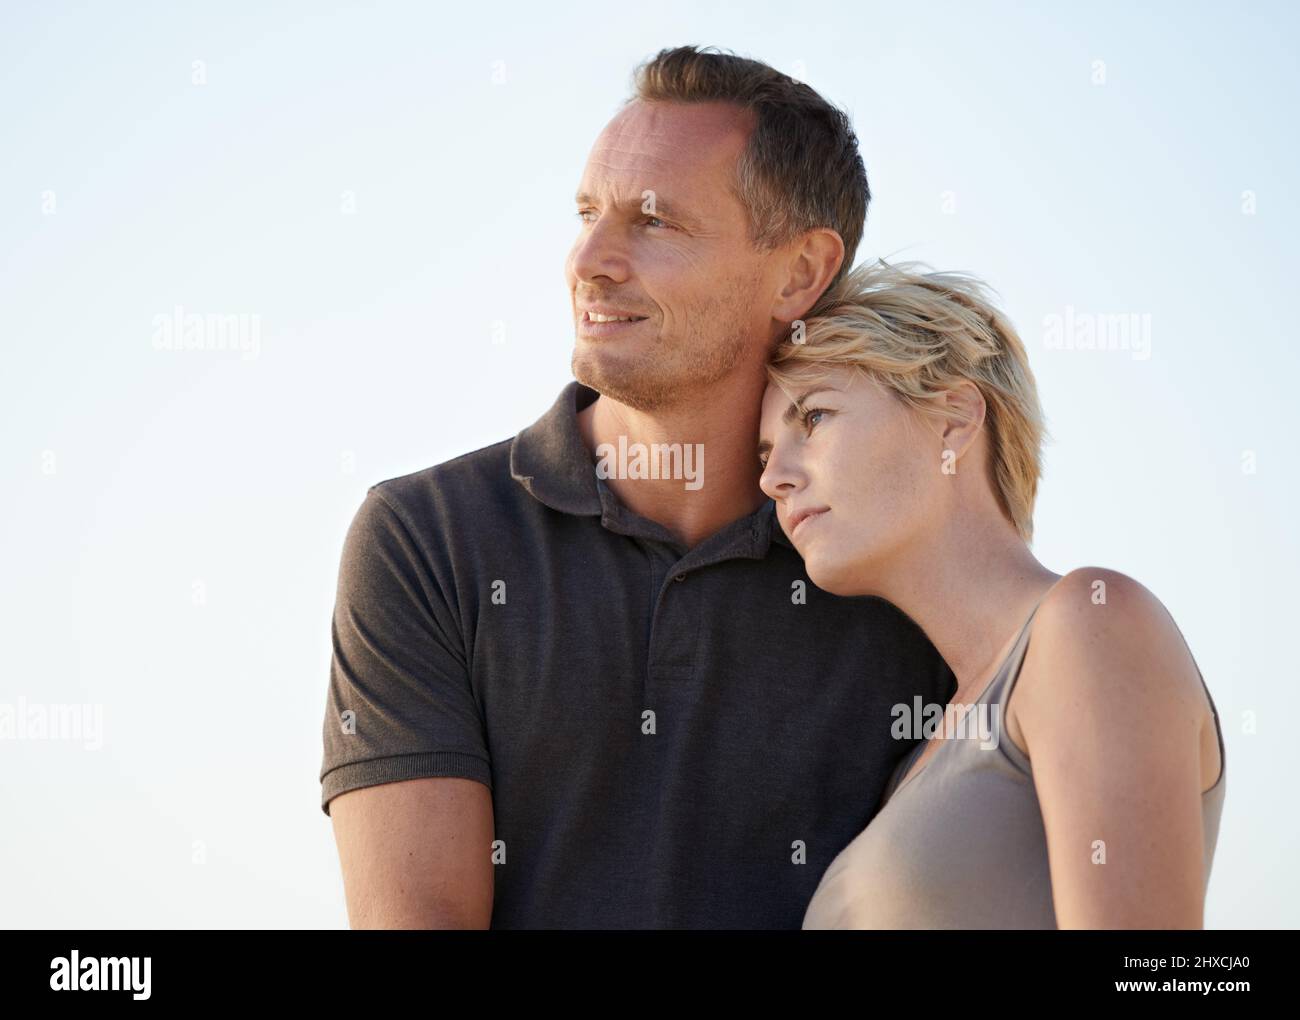 Our bond strengthens everyday. A happy couple embracing on the beach. Stock Photo